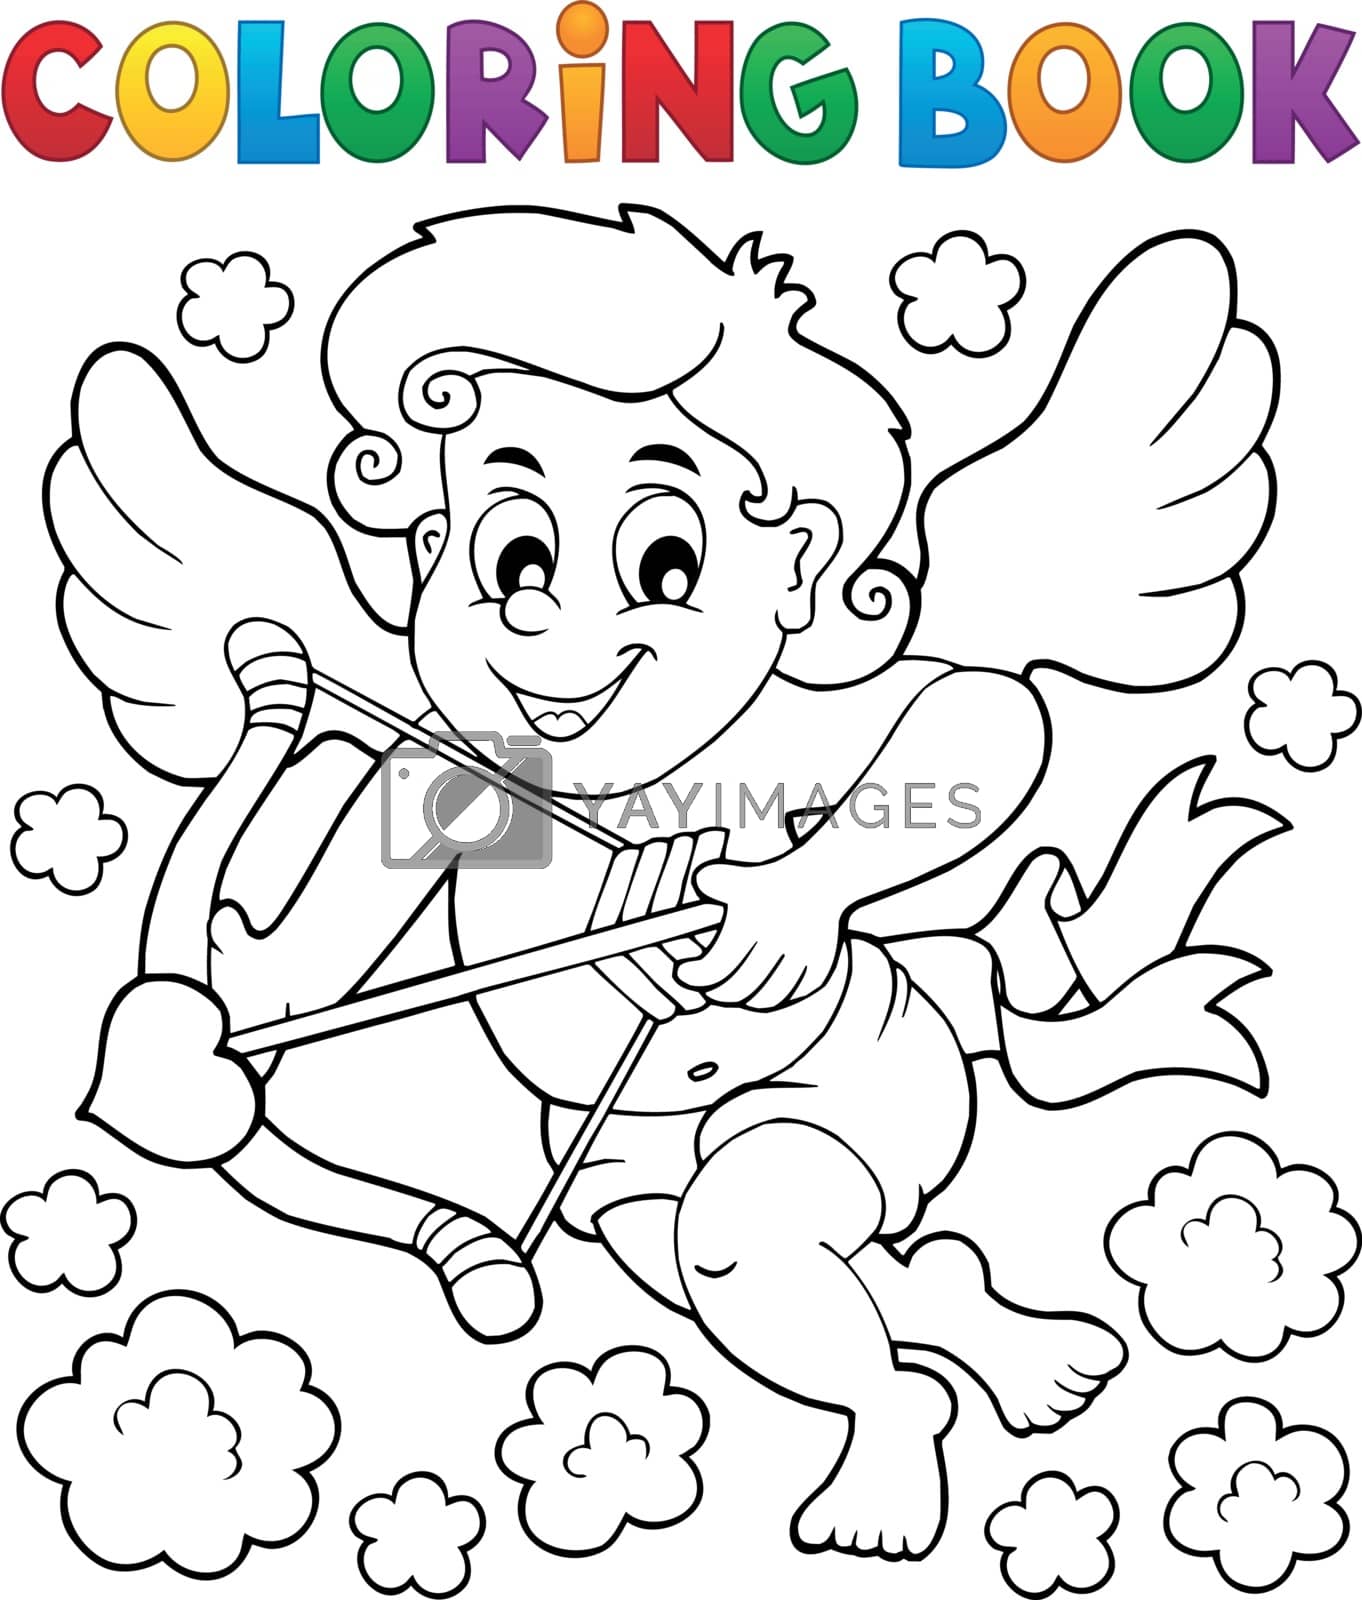 Royalty free image of Coloring book with Cupid 5 by clairev